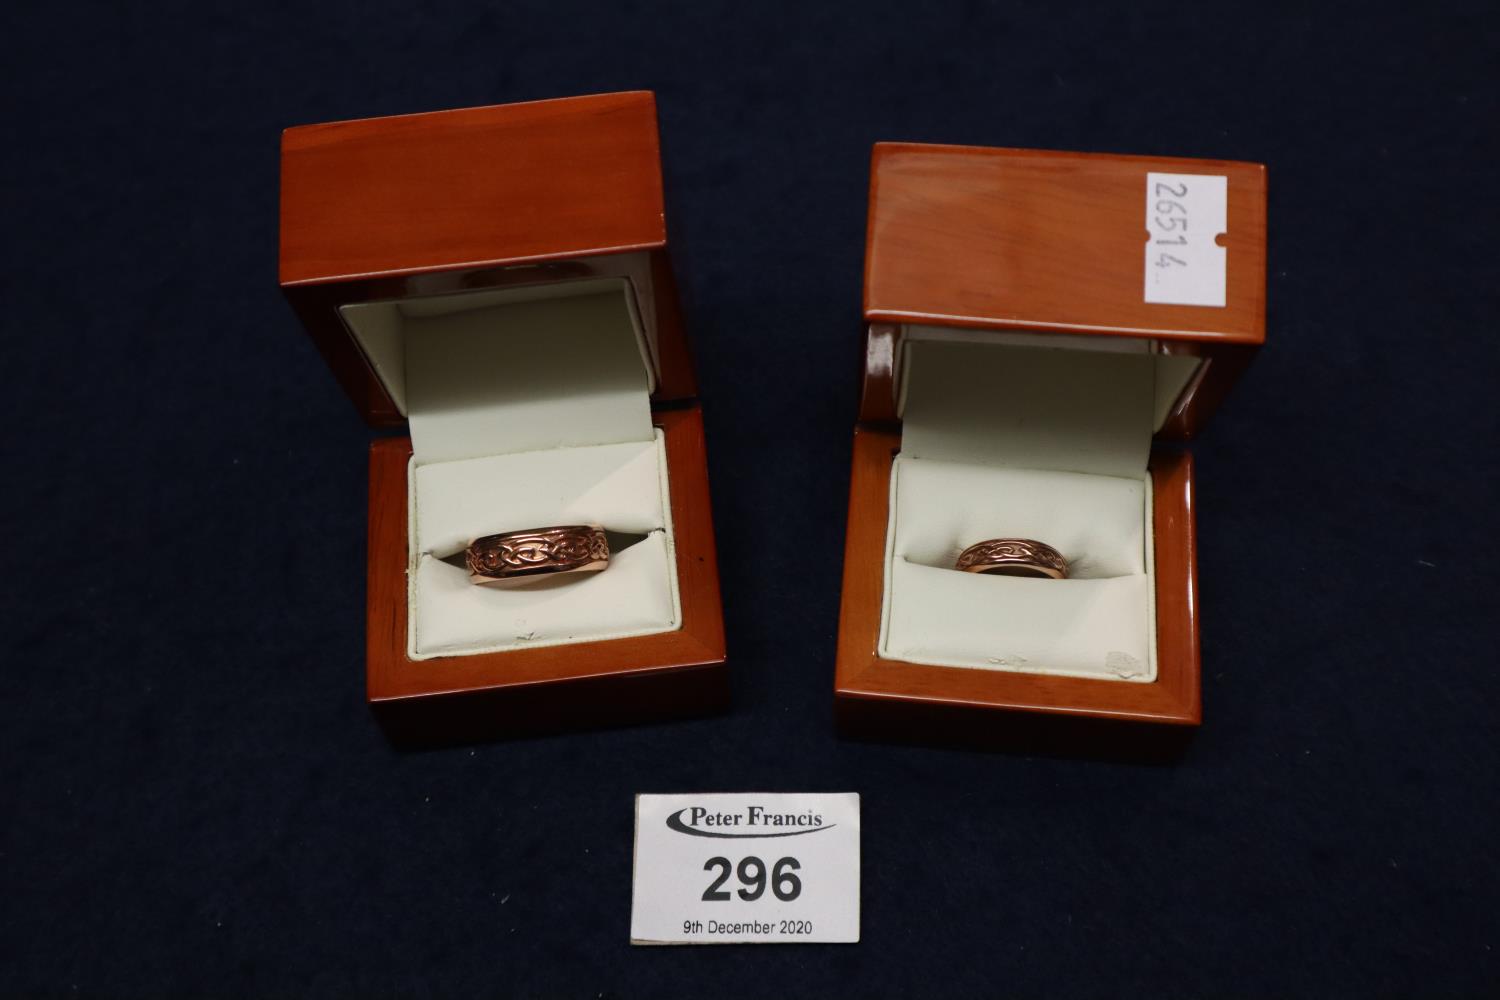 Two Clogau gold wedding rings both 9ct rose gold. Size L and Z. Approximate weight 12.4 grams. (B.P.